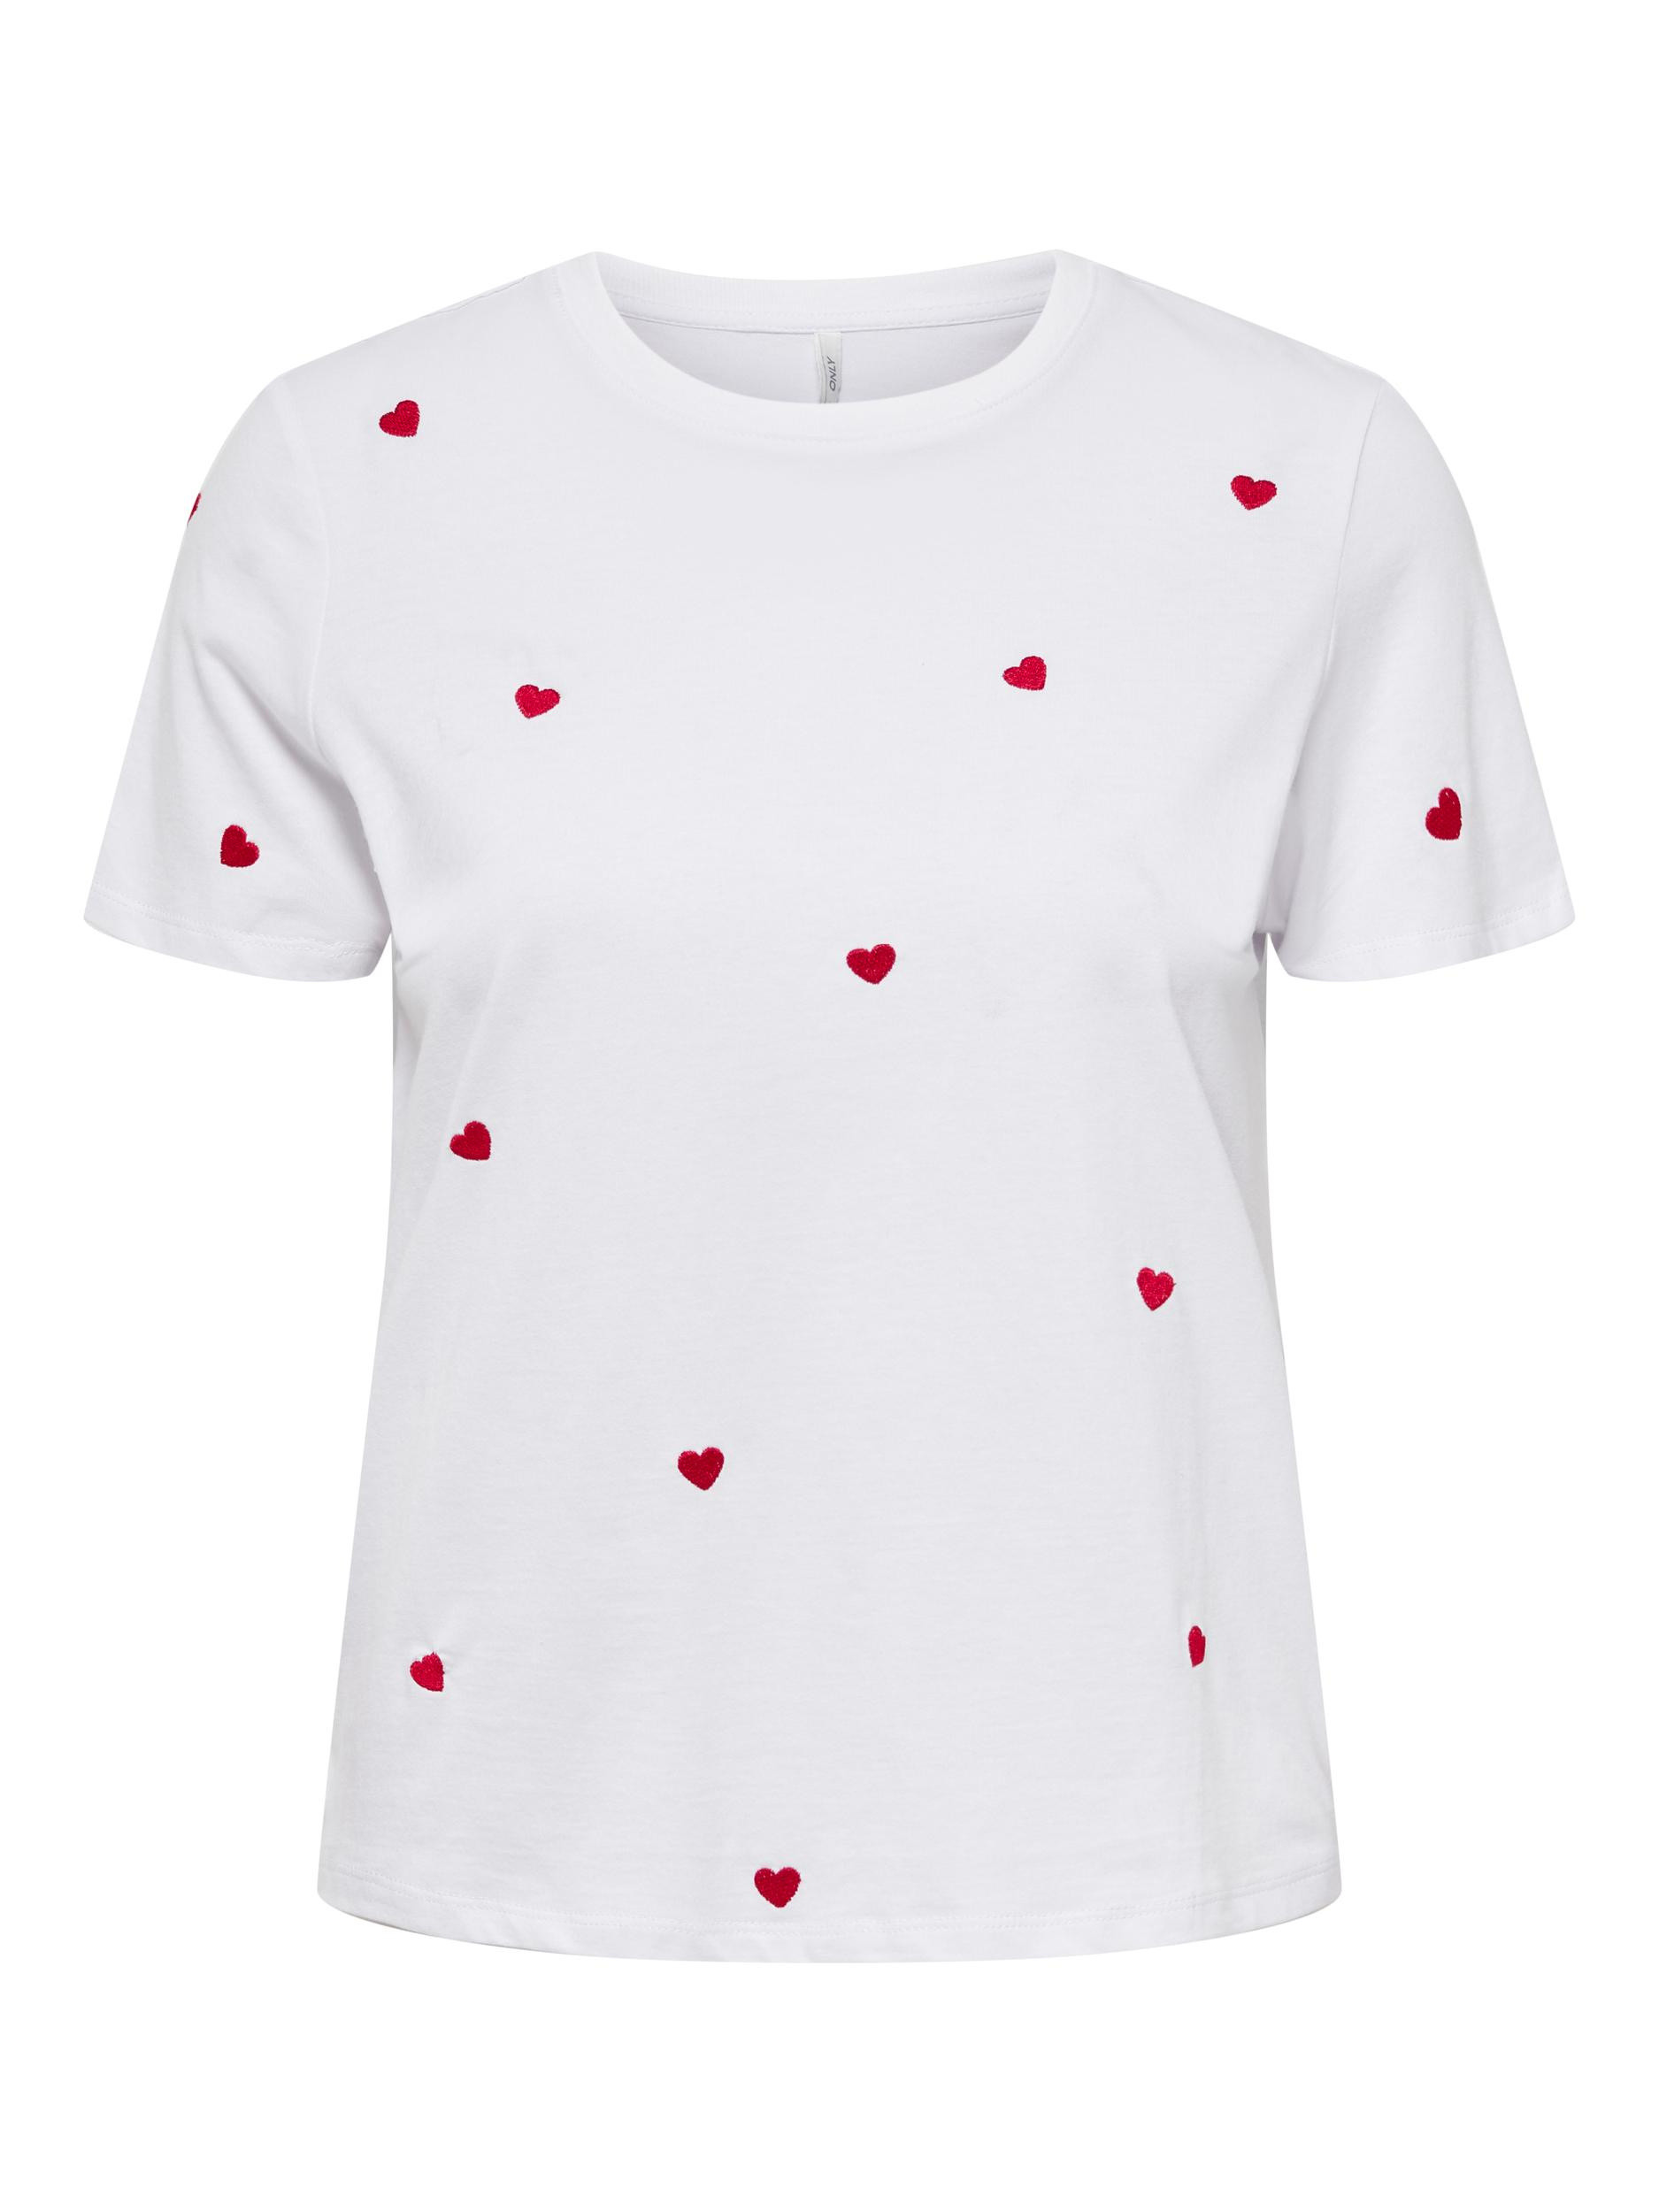 Only - Regular fit T-shirt with print, White, large image number 0